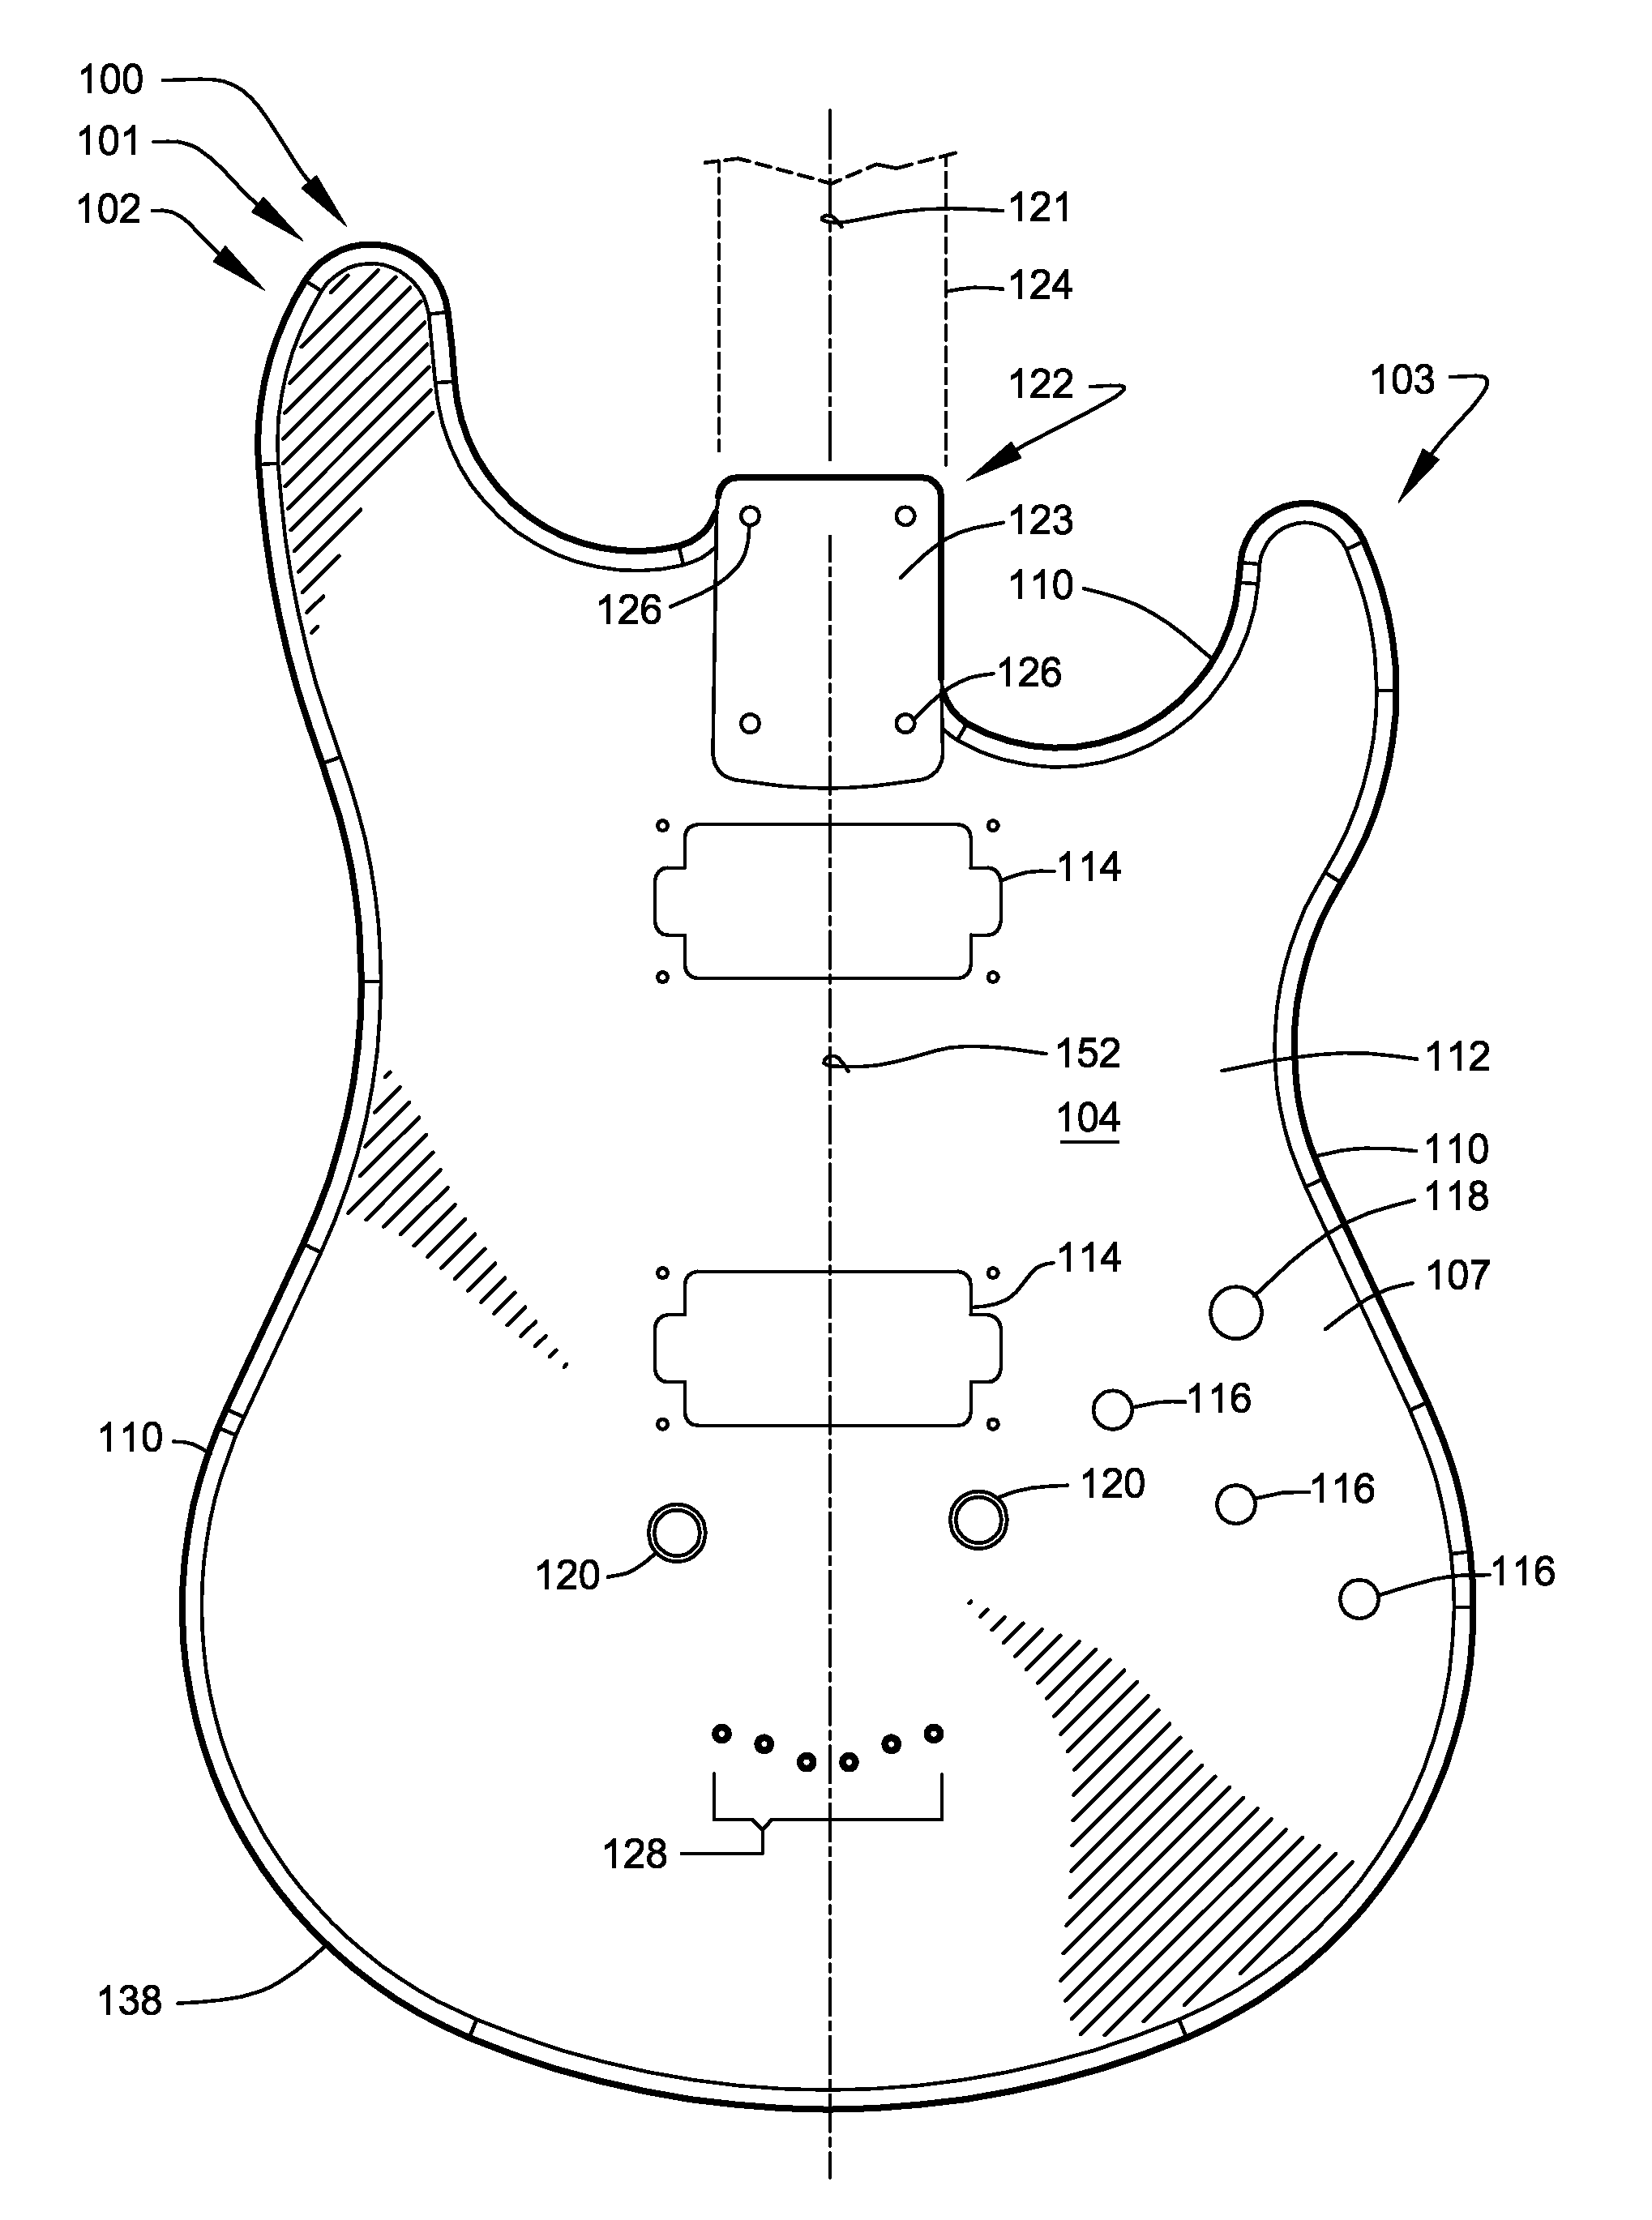 Guitar component systems